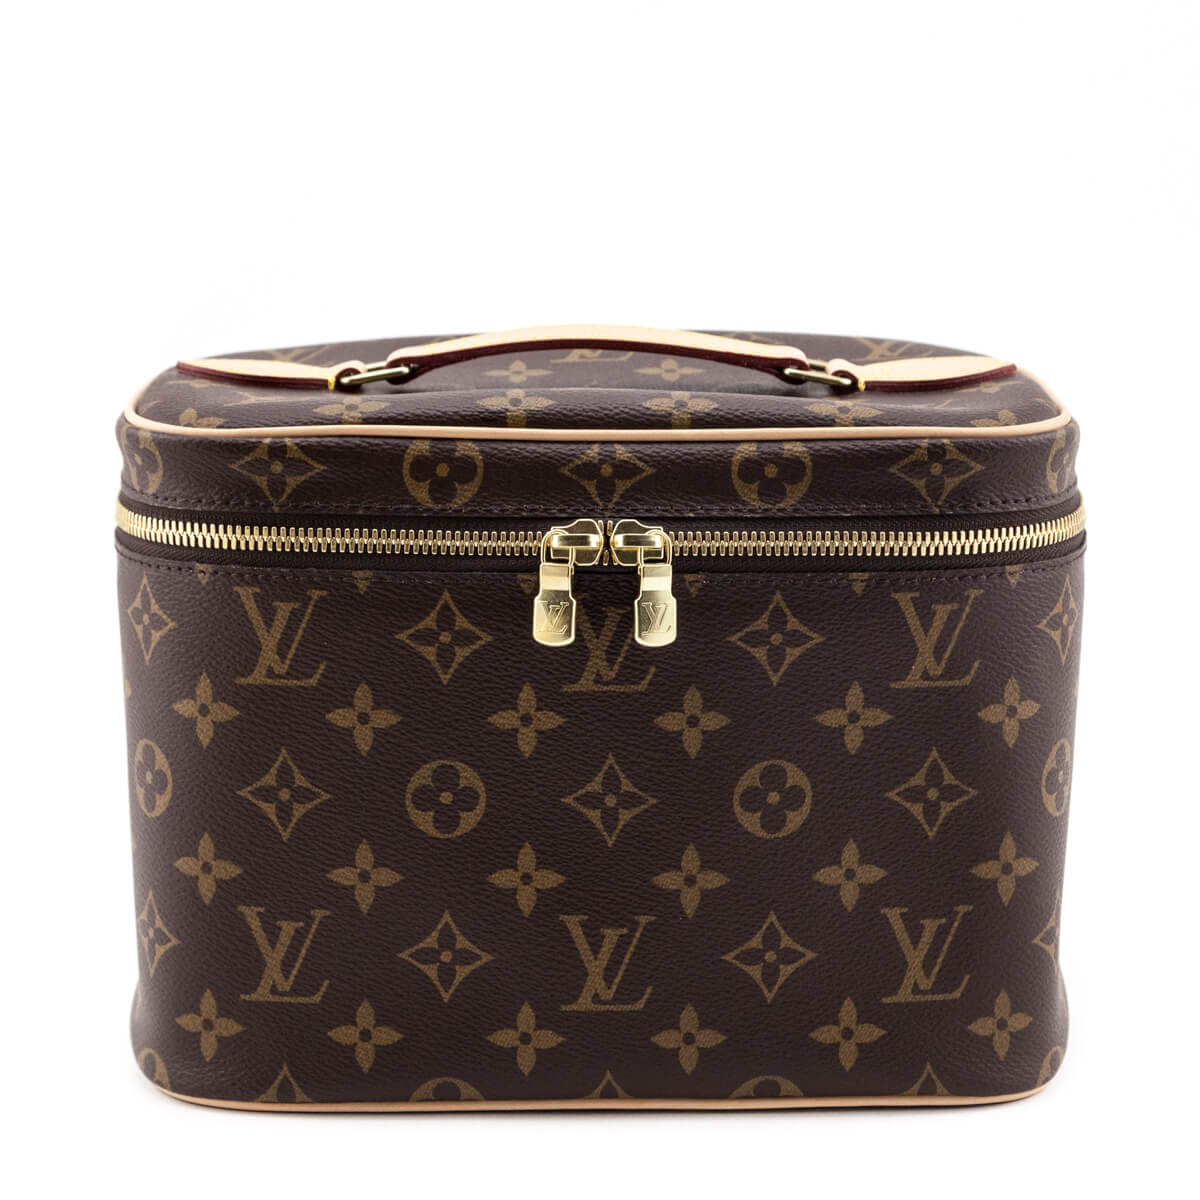 Naughtipidgins Nest - Louis Vuitton Nice BB Toiletry Bag Vanity Case in  Monogram with Samorga Felt Liner. See here for price, details and to  purchase >  Louis-Vuitton-Nice-BB-Toiletry-Bag